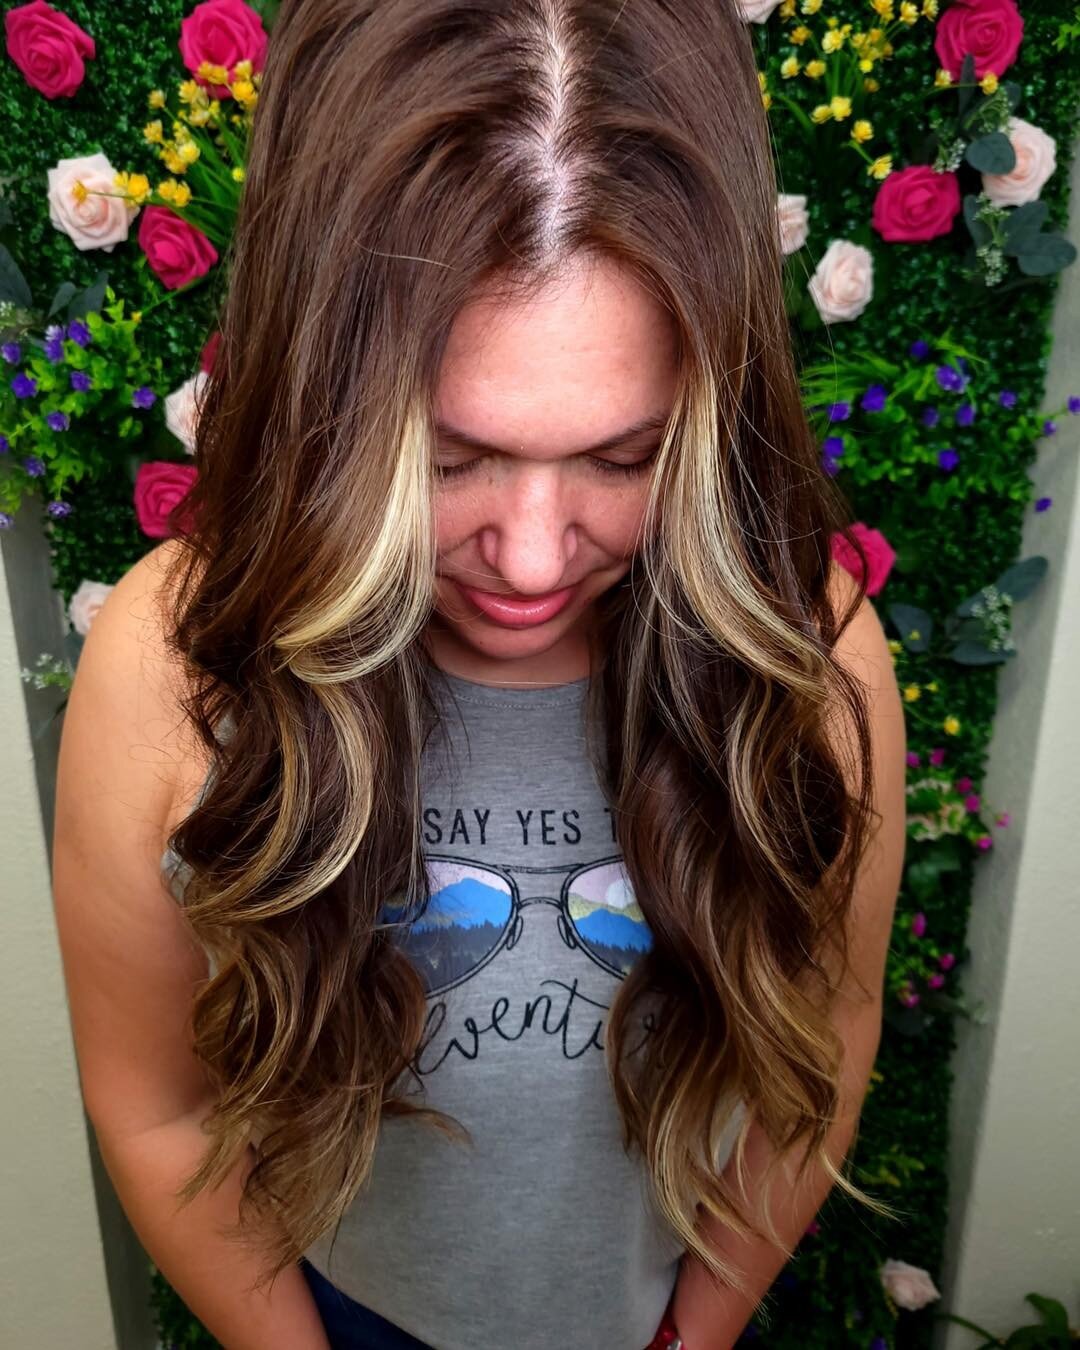 A little bit of color makes BIG difference, brighten up your life with a fab balayage! We&rsquo;re obsessed with the face framing 🙌 
⭐️ Balayage, haircut and style by Baylee. #lookgoodfeelgorgeous
#modesalon #arlingtontx #teammode #modehairsalon #te